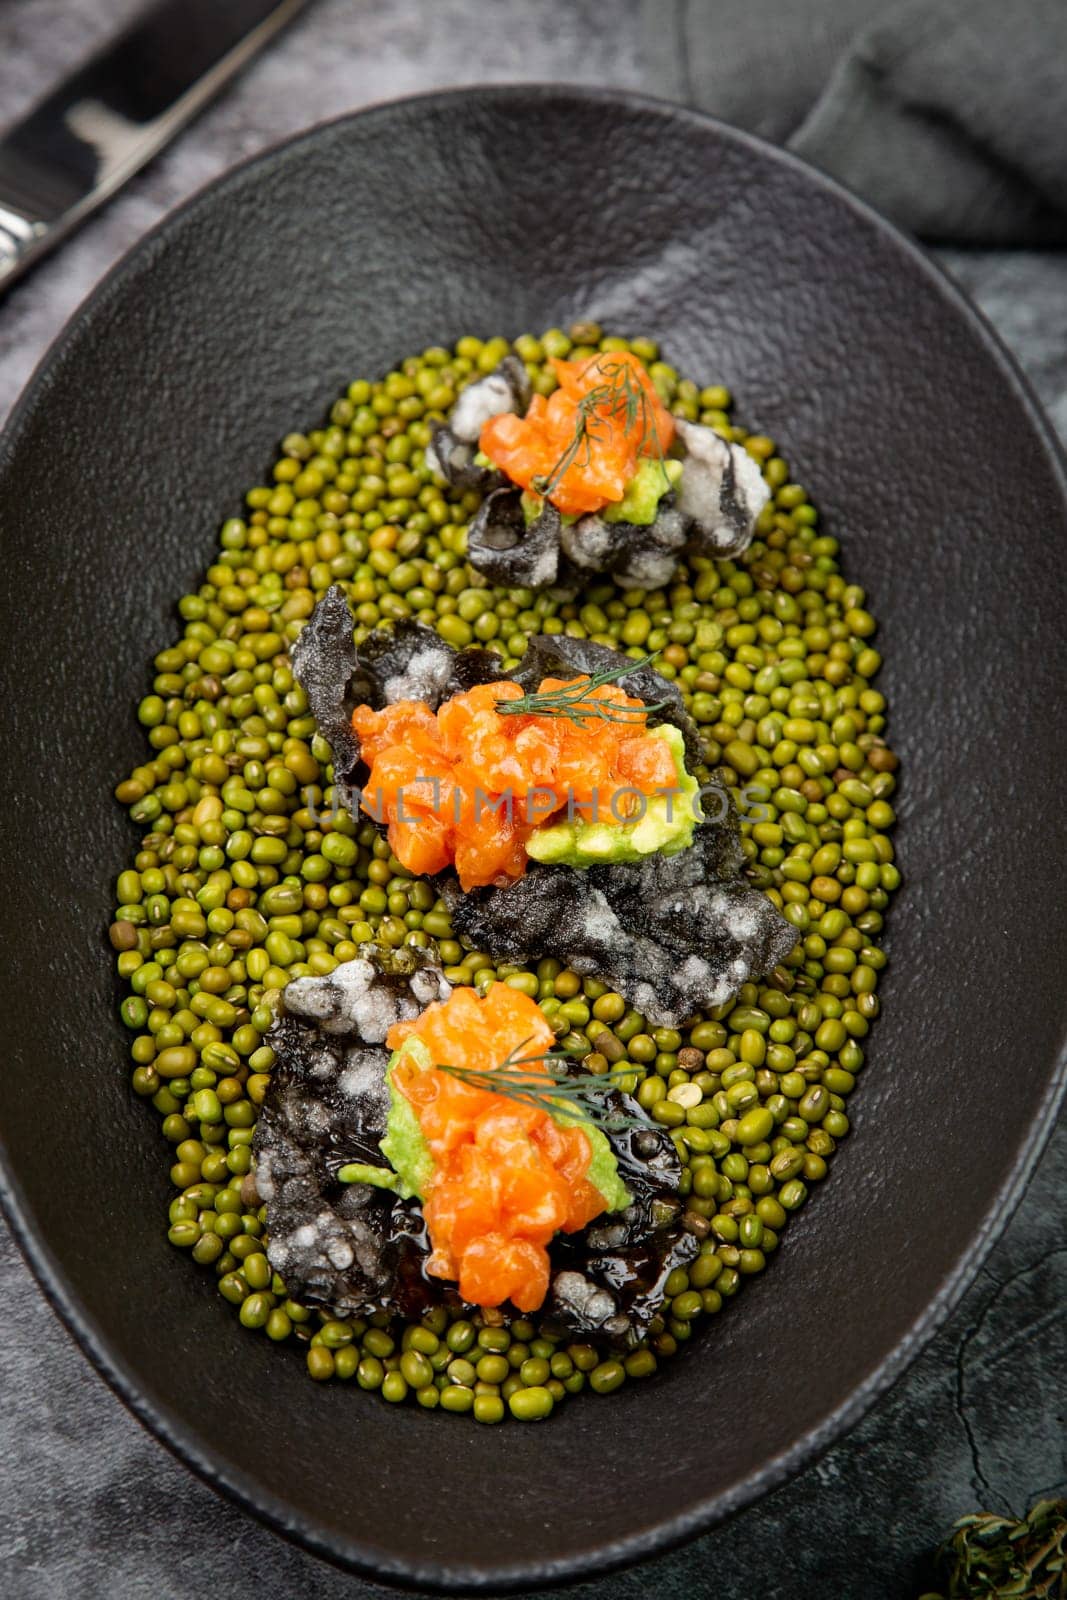 black caviar, red fish and wassabi on a plate with peas, top view by tewolf